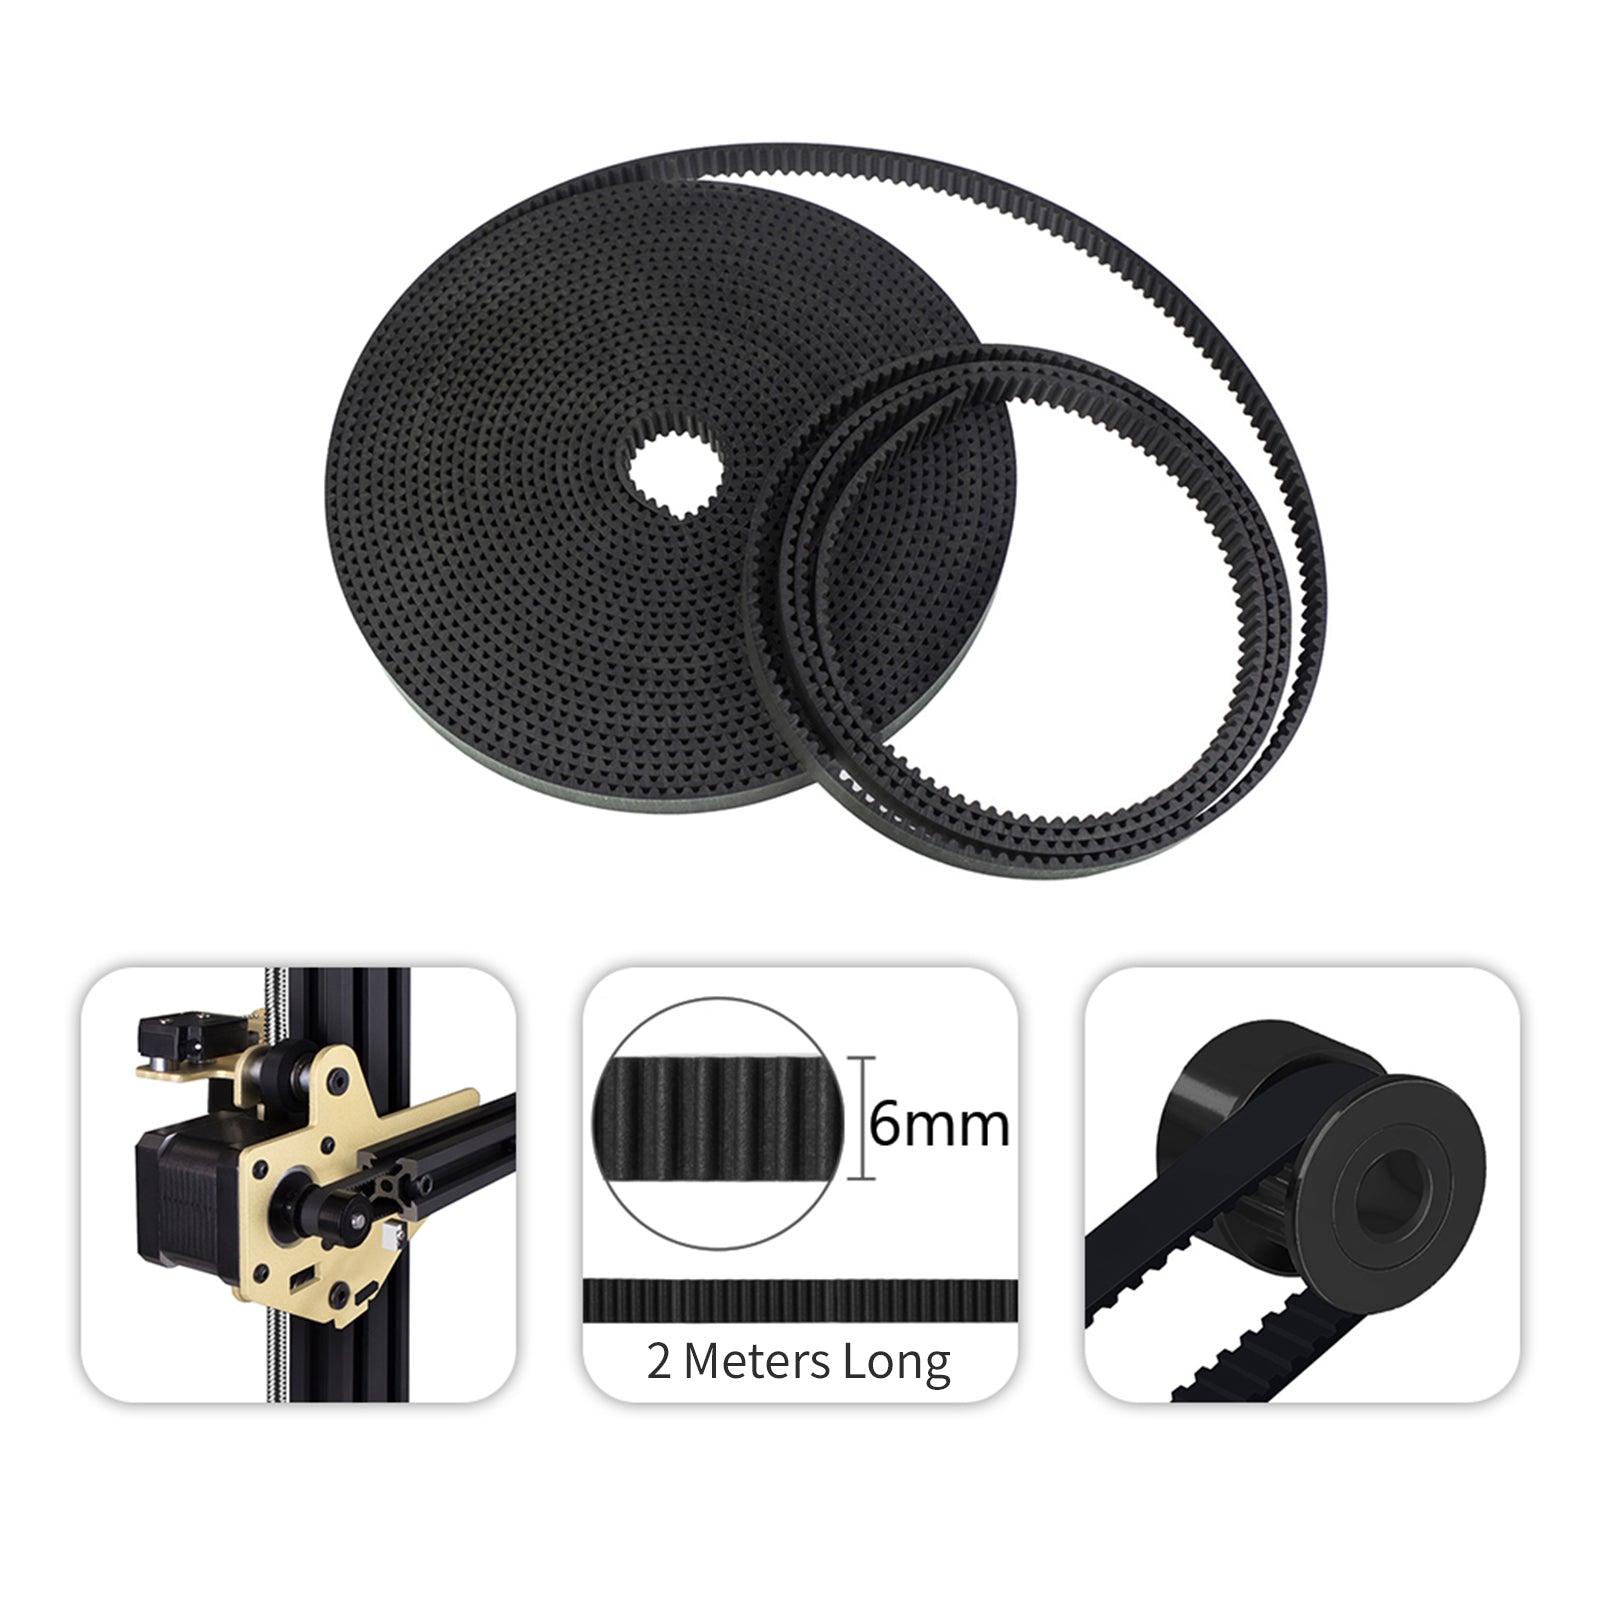 2 Meters GT2 Timing Belt 6mm Width with 5pcs GT2 20 Teeth Pulley Wheels 5mm Bore Allen Wrench for 3D Printer Accessories